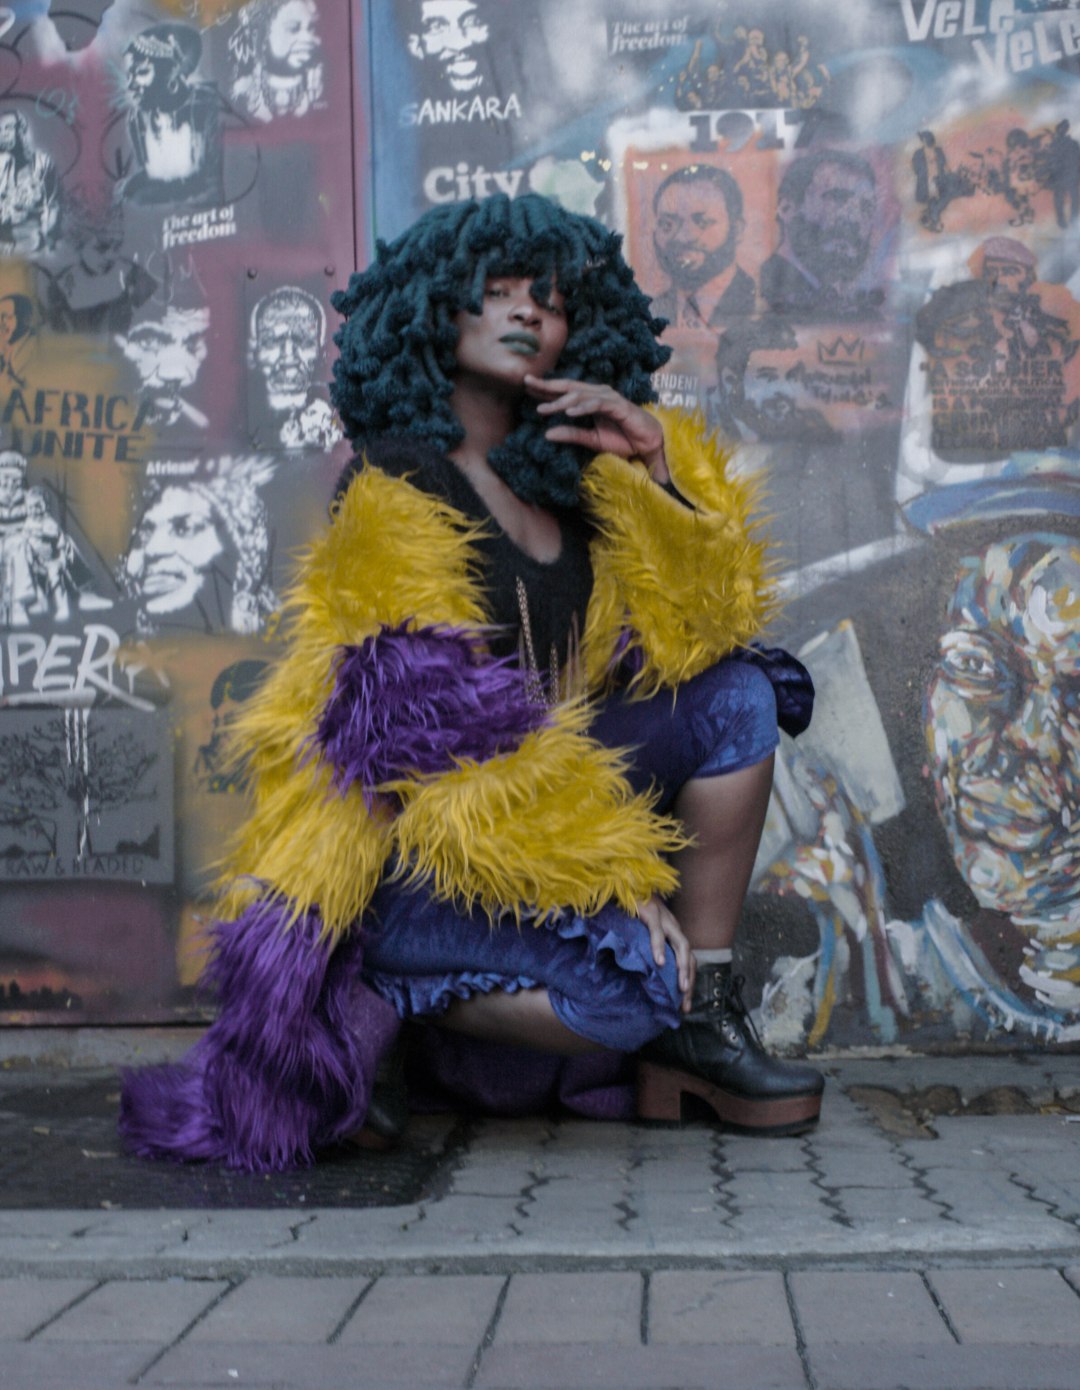 Johannesburg’s underground artists are rising up by staying true to themselves